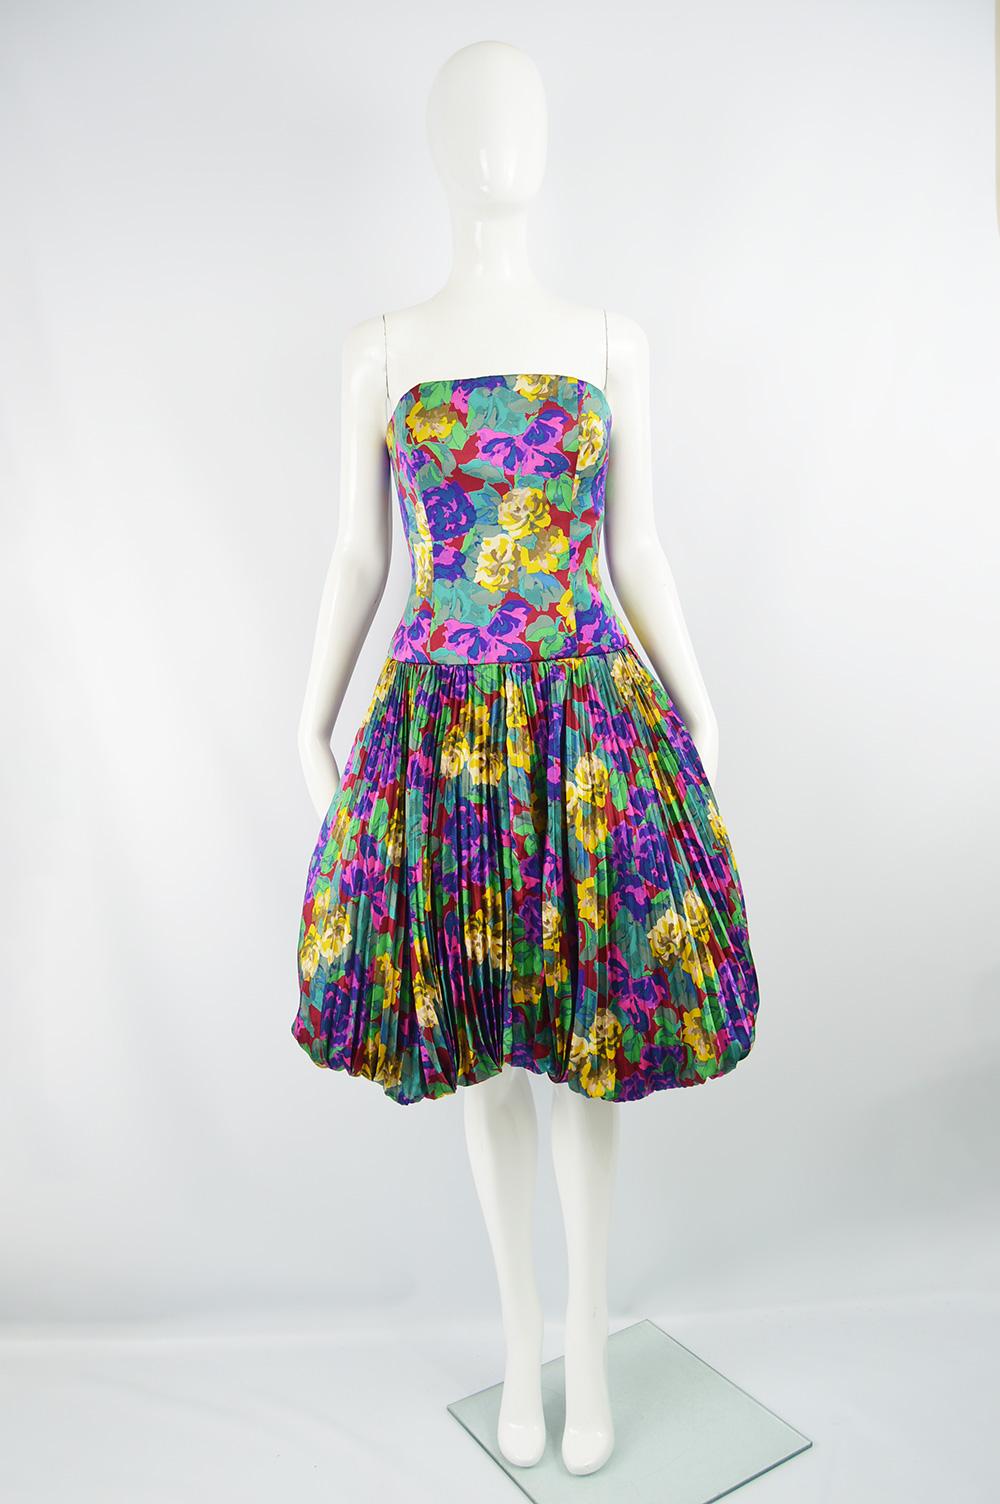 A stunning vintage evening dress by Chloé from autumn winter 1988 as seen in the runway collection. In a floral print silk with a strapless, boned bodice and an accordion pleated bubble hem skirt. 

Size: Not indicated; fits like a UK 10/ US 6/ EU